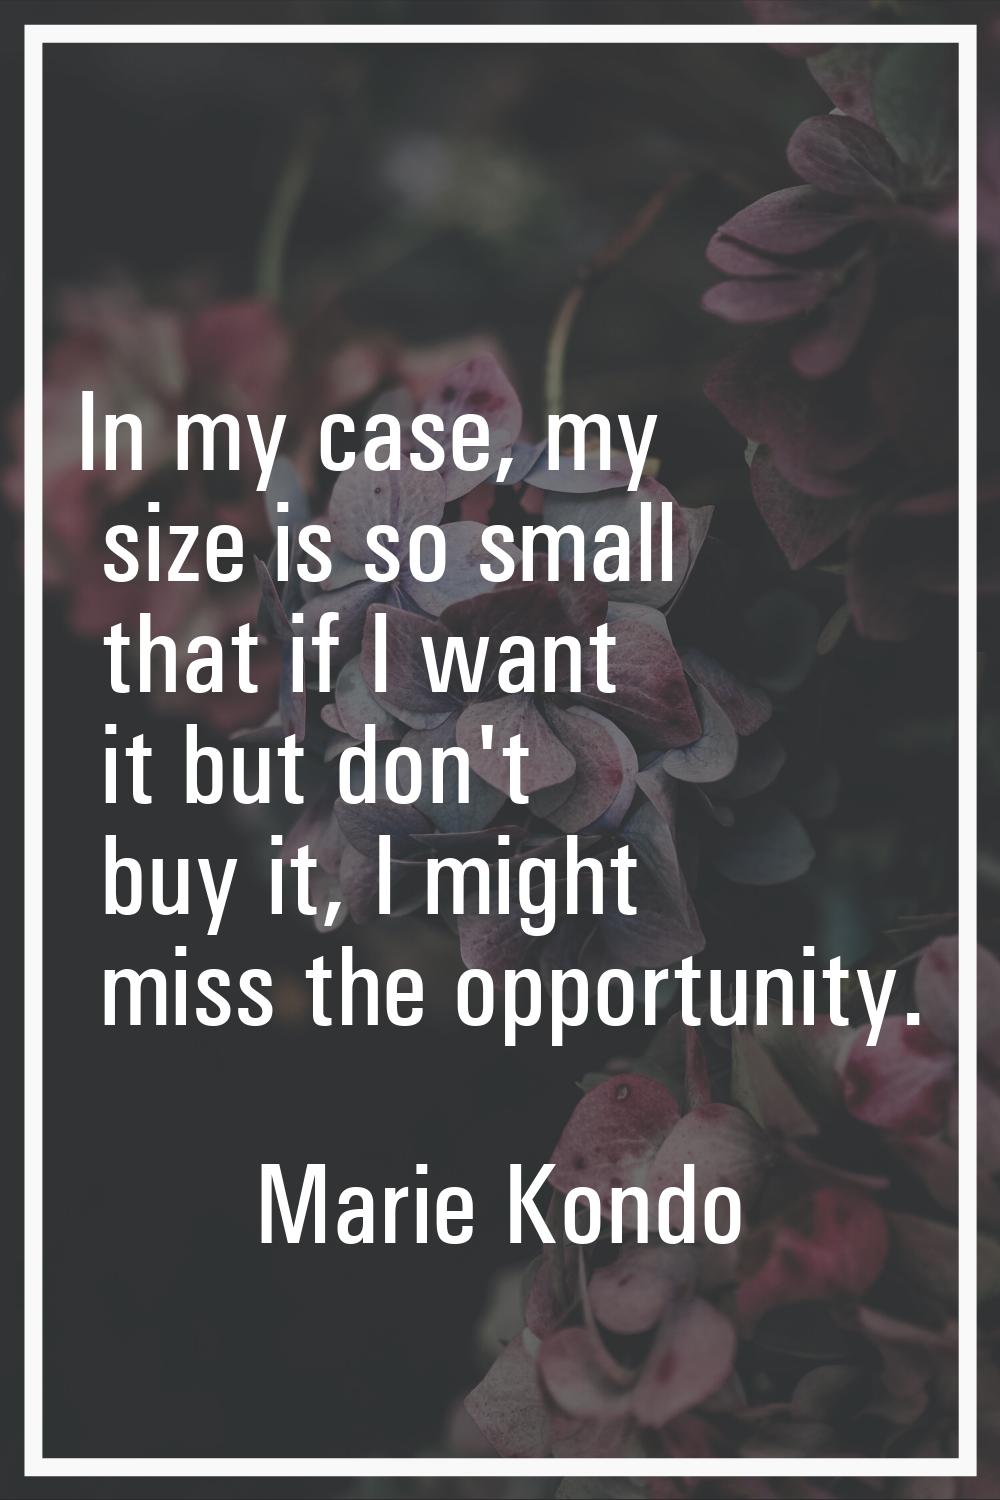 In my case, my size is so small that if I want it but don't buy it, I might miss the opportunity.